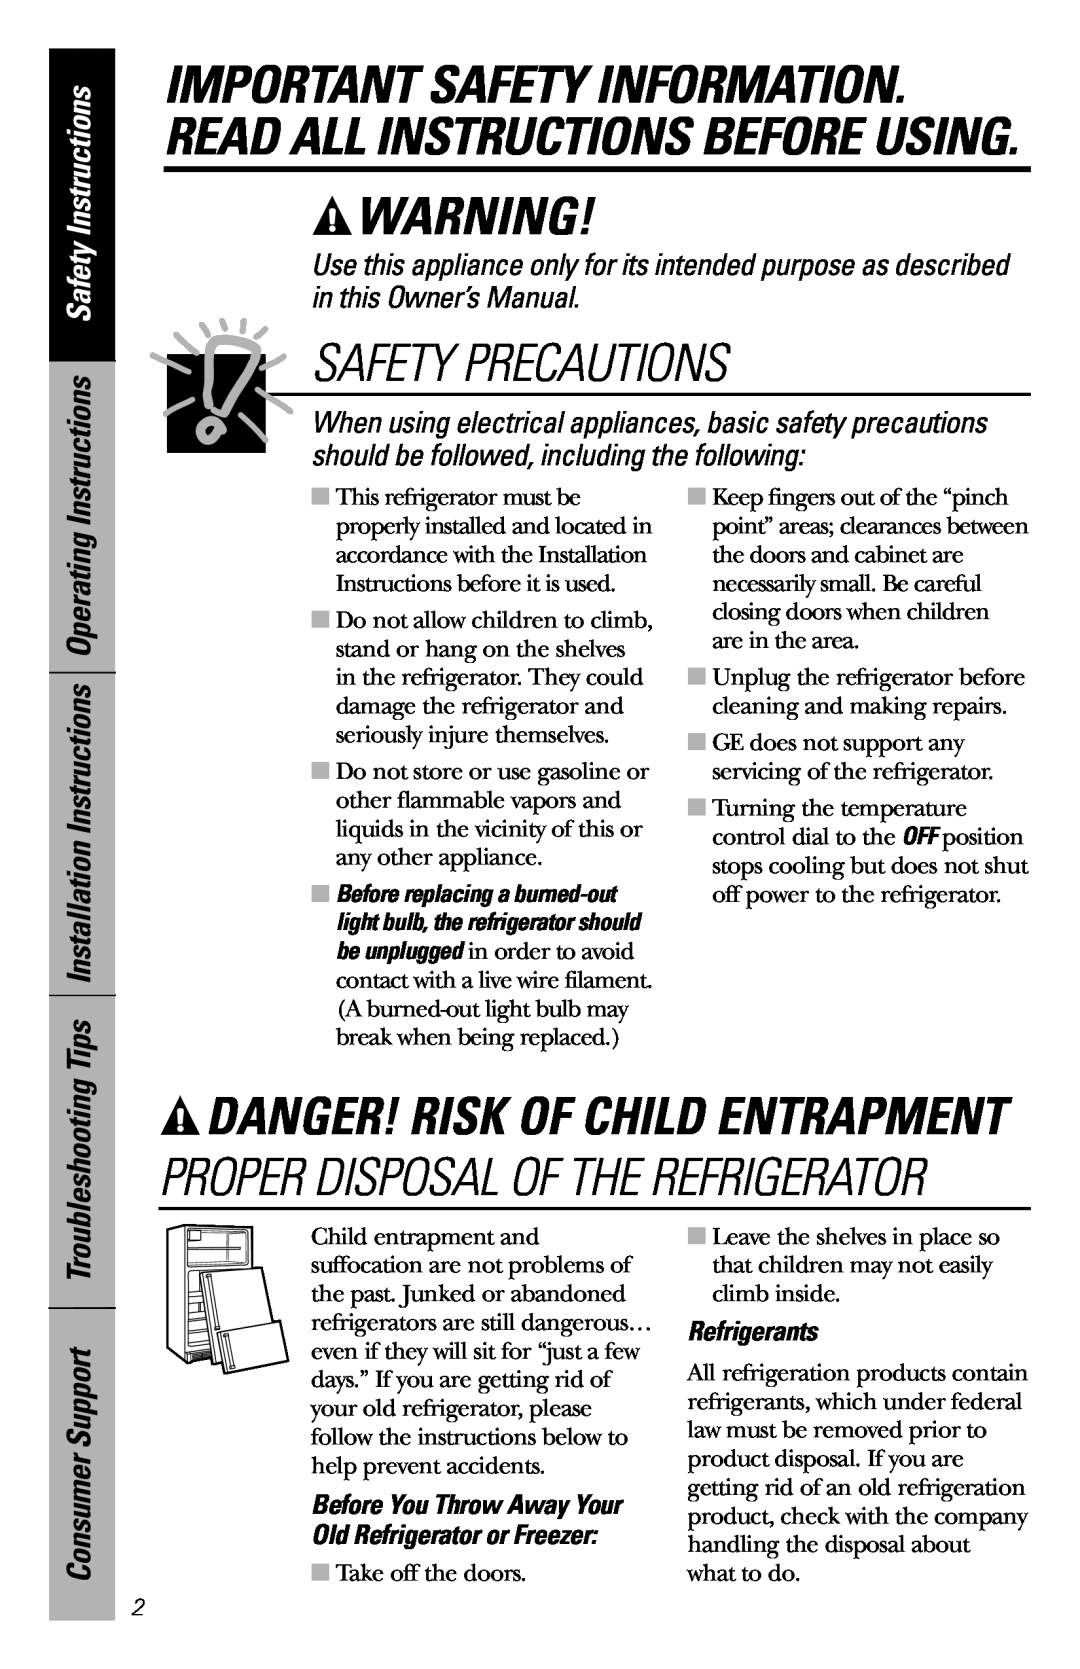 GE 2 Cubic Foot Models owner manual Safety Precautions, Danger! Risk Of Child Entrapment, Consumer Support, Refrigerants 